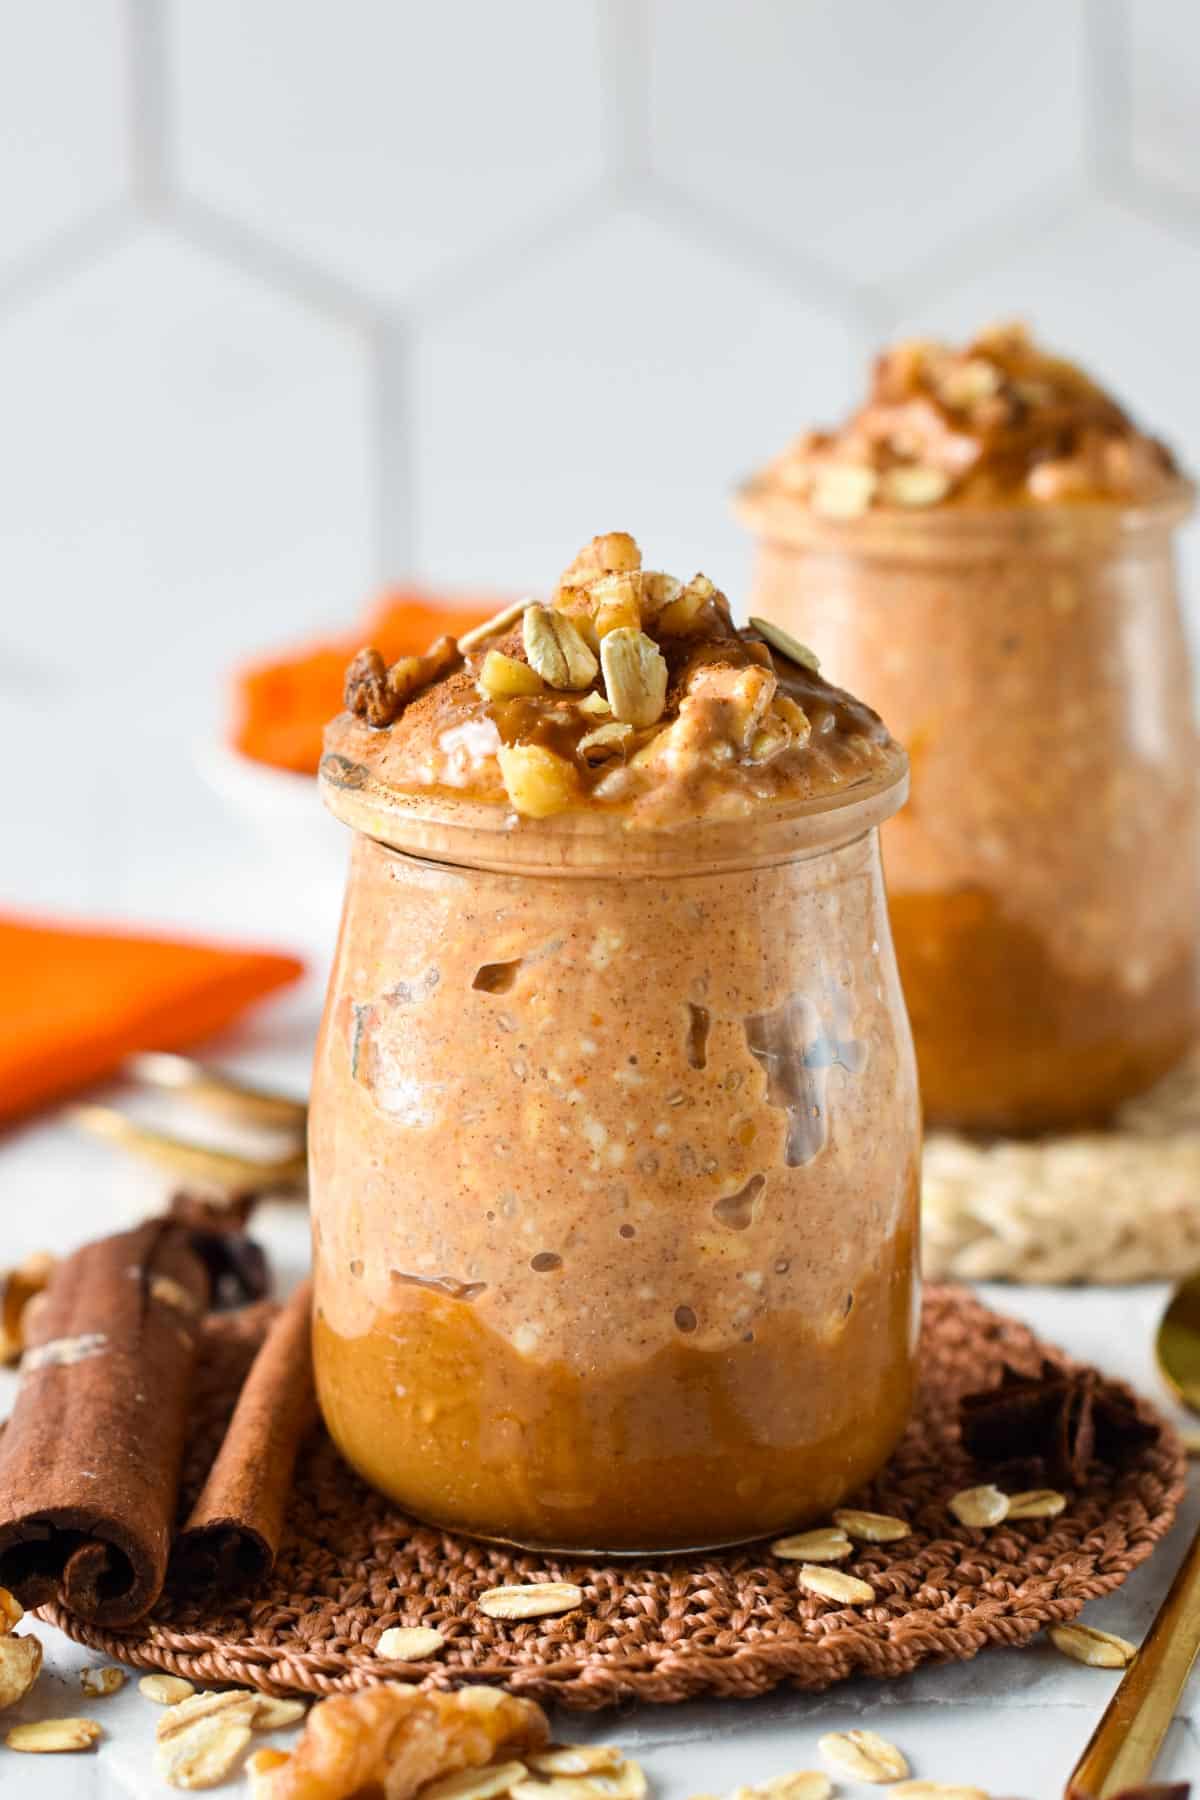 This Pumpkin Overnight Oat recipe has a creamy smooth texture, full of pumpkin spice flavor and nutrients to start the day healthy.